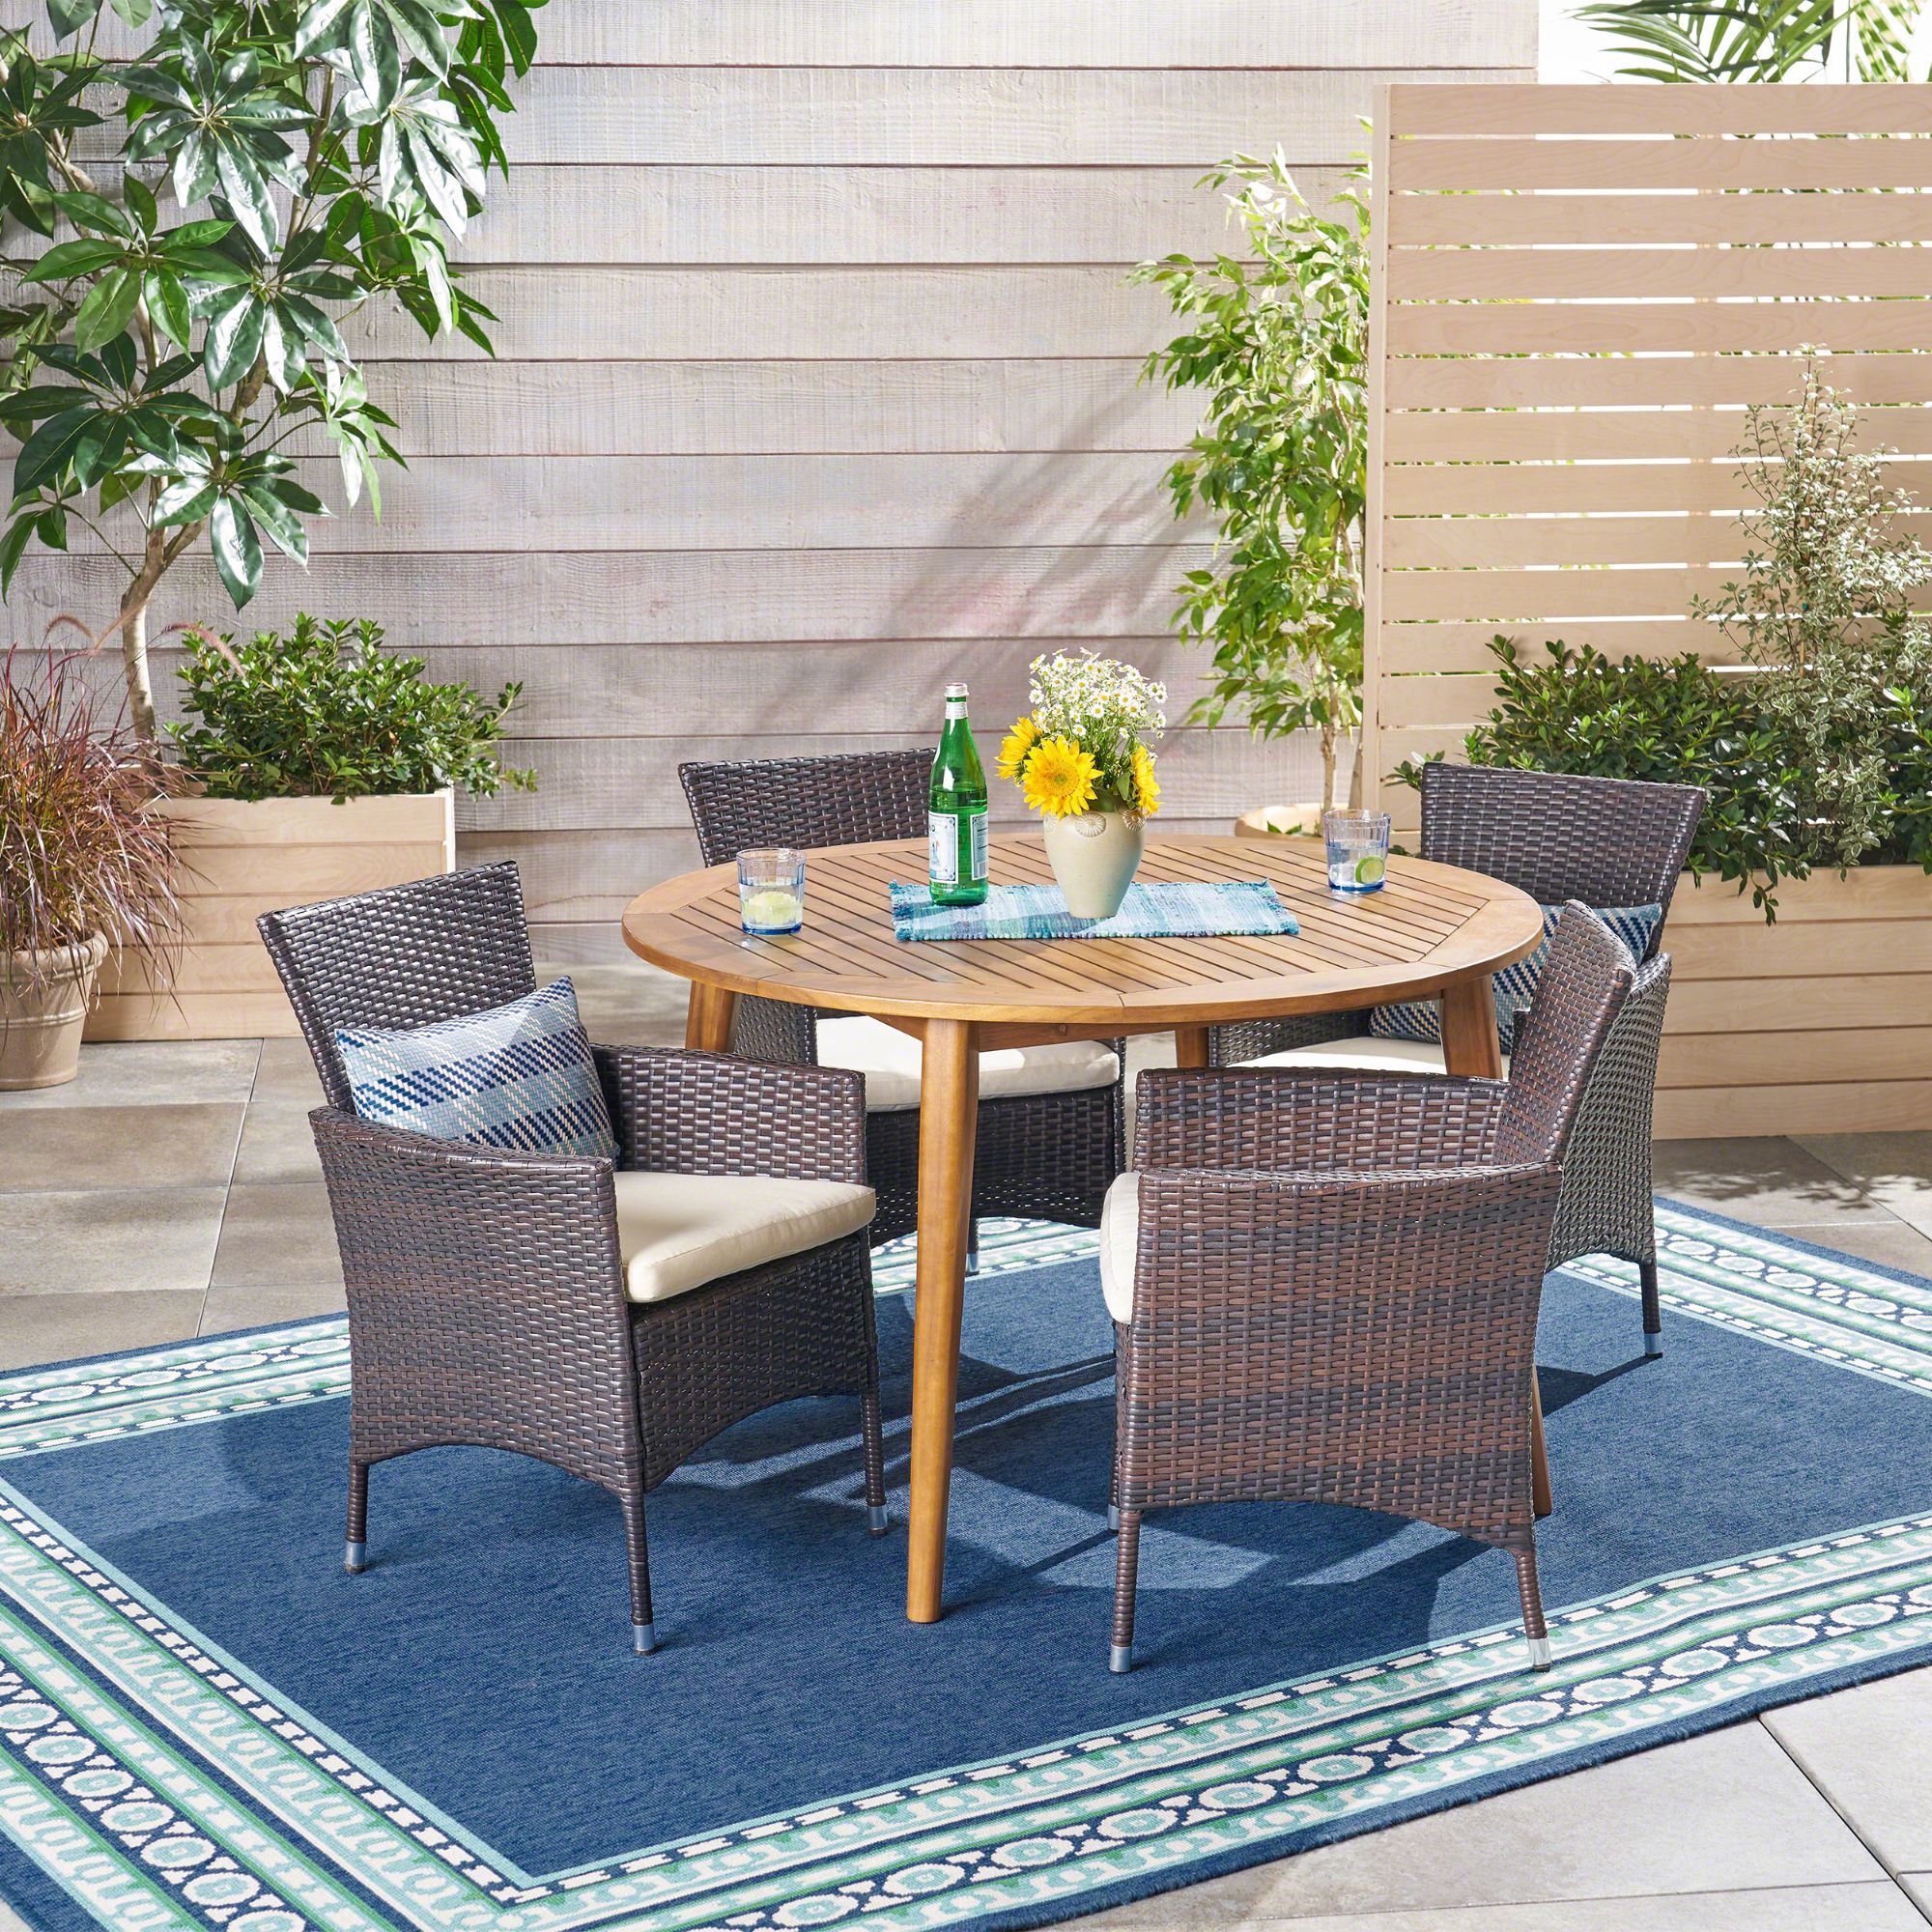 5 Piece Brown Wicker Finish Round Outdoor Furniture Patio Dining Set Regarding Round 5 Piece Outdoor Patio Dining Sets (View 3 of 15)